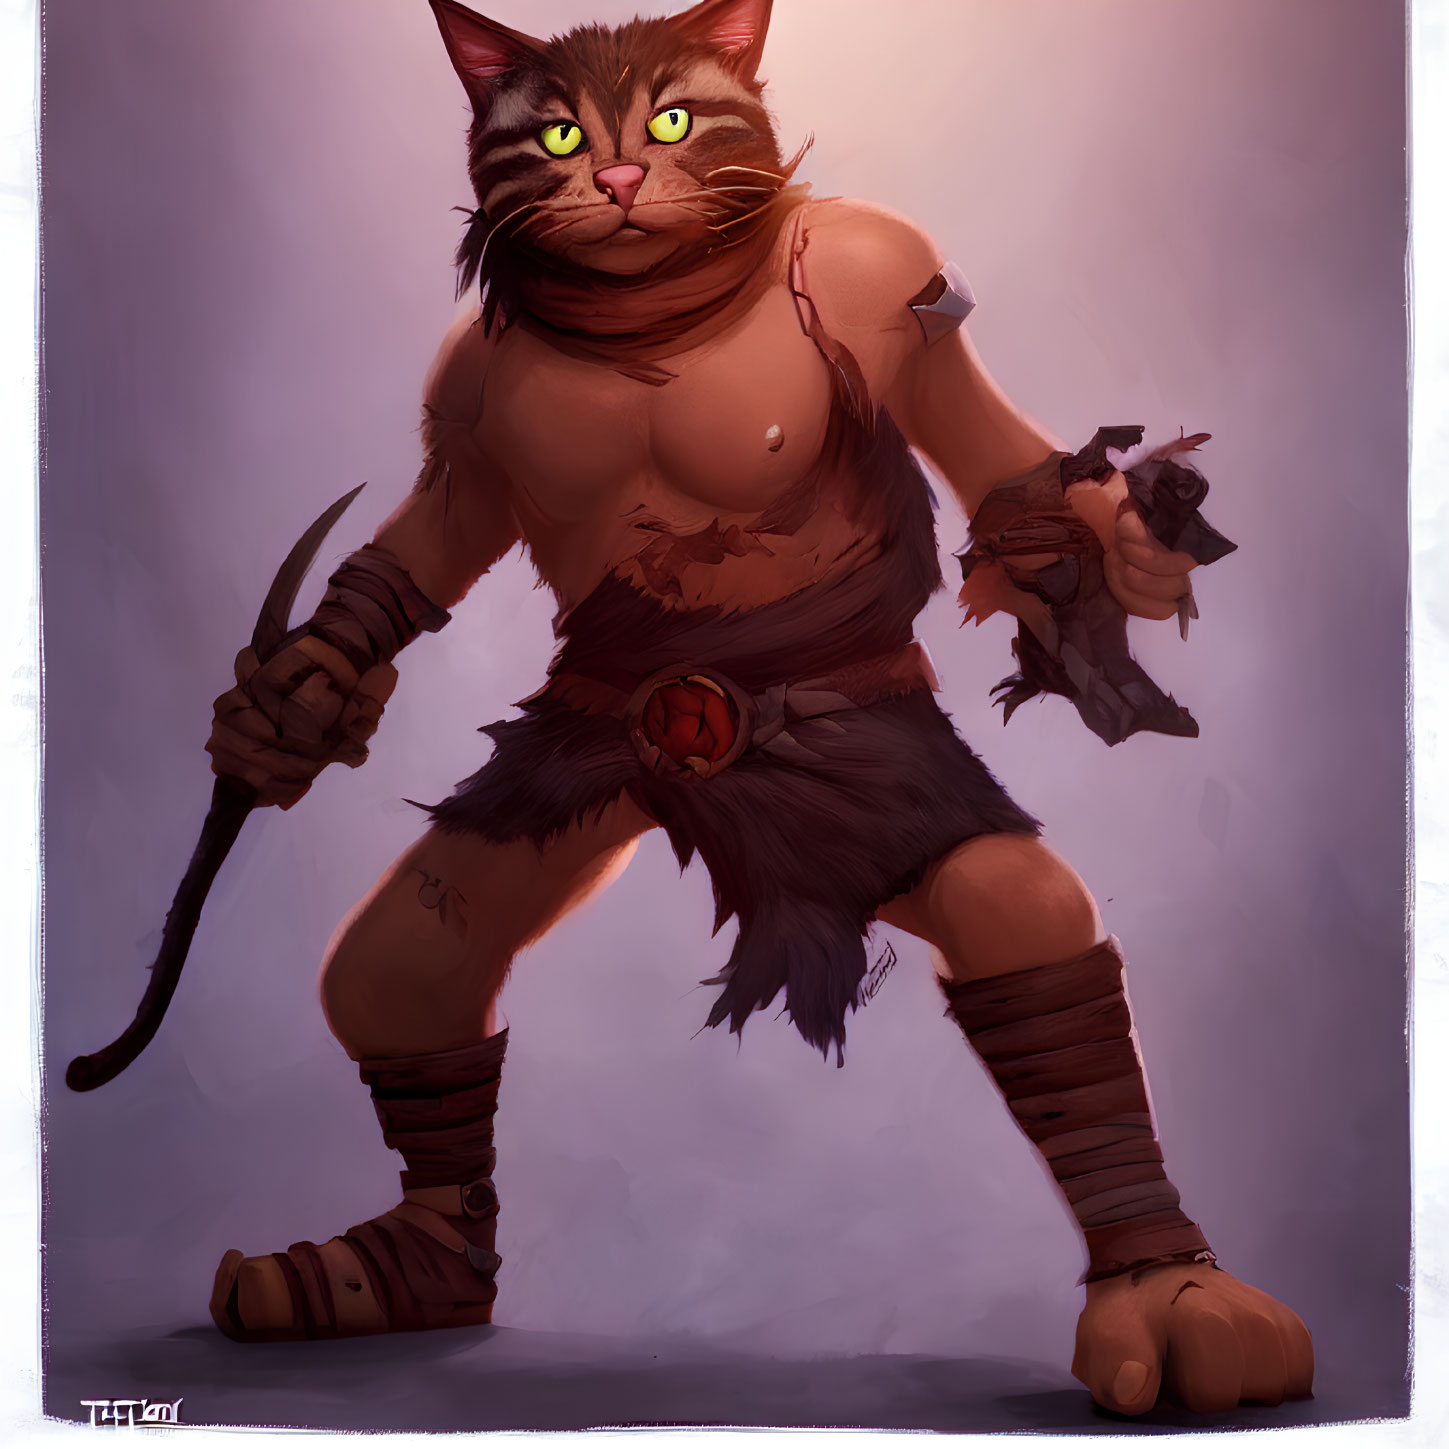 Feline warrior in tattered clothing with dagger and bird, green eyes.